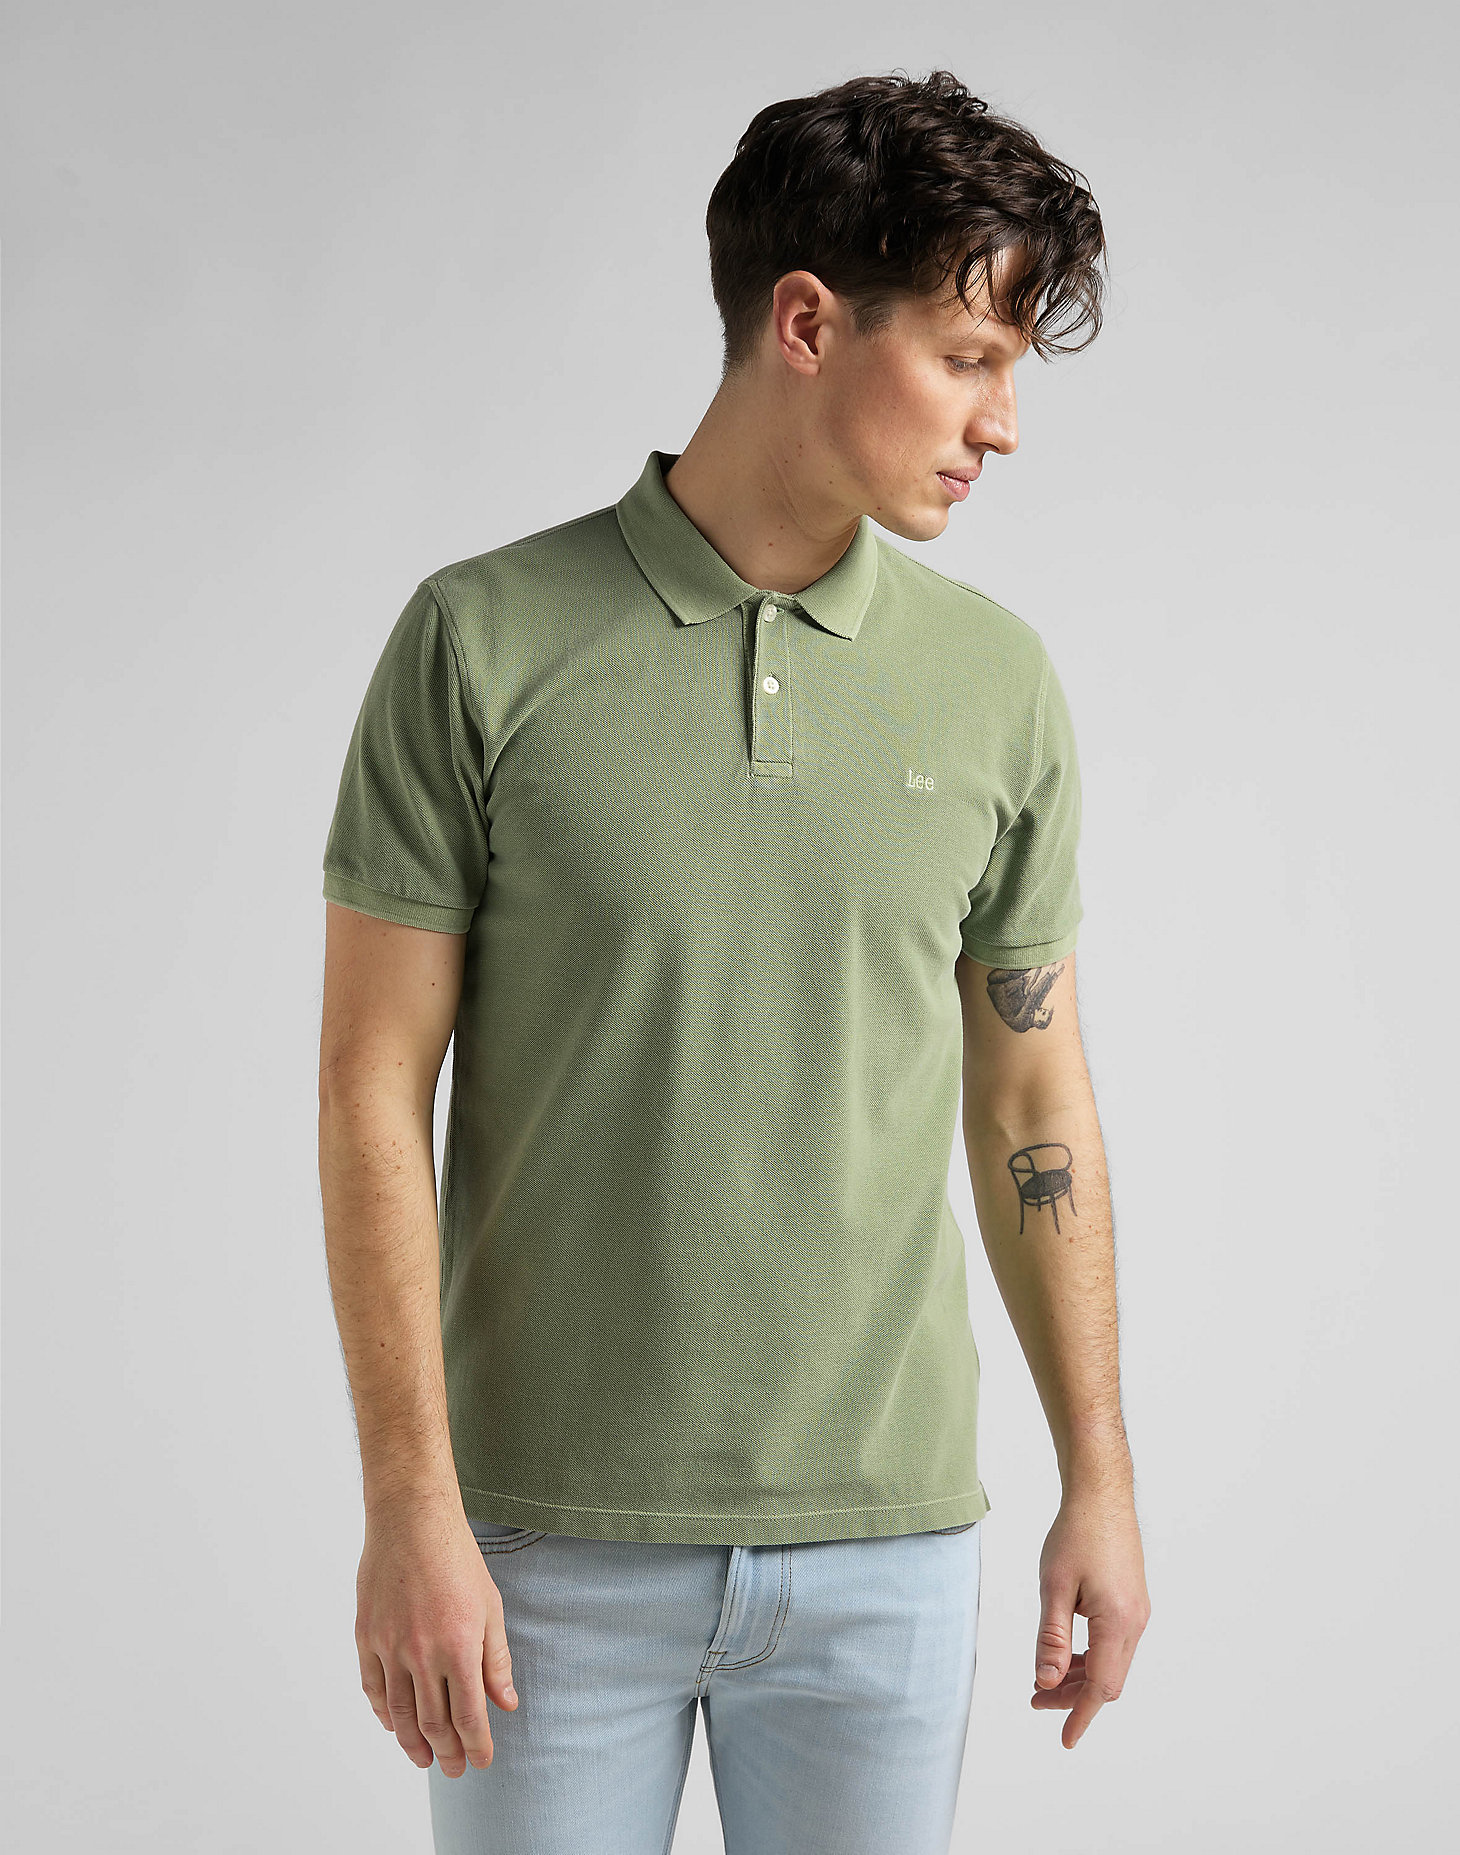 Natural Dye Polo in Brindle Green main view